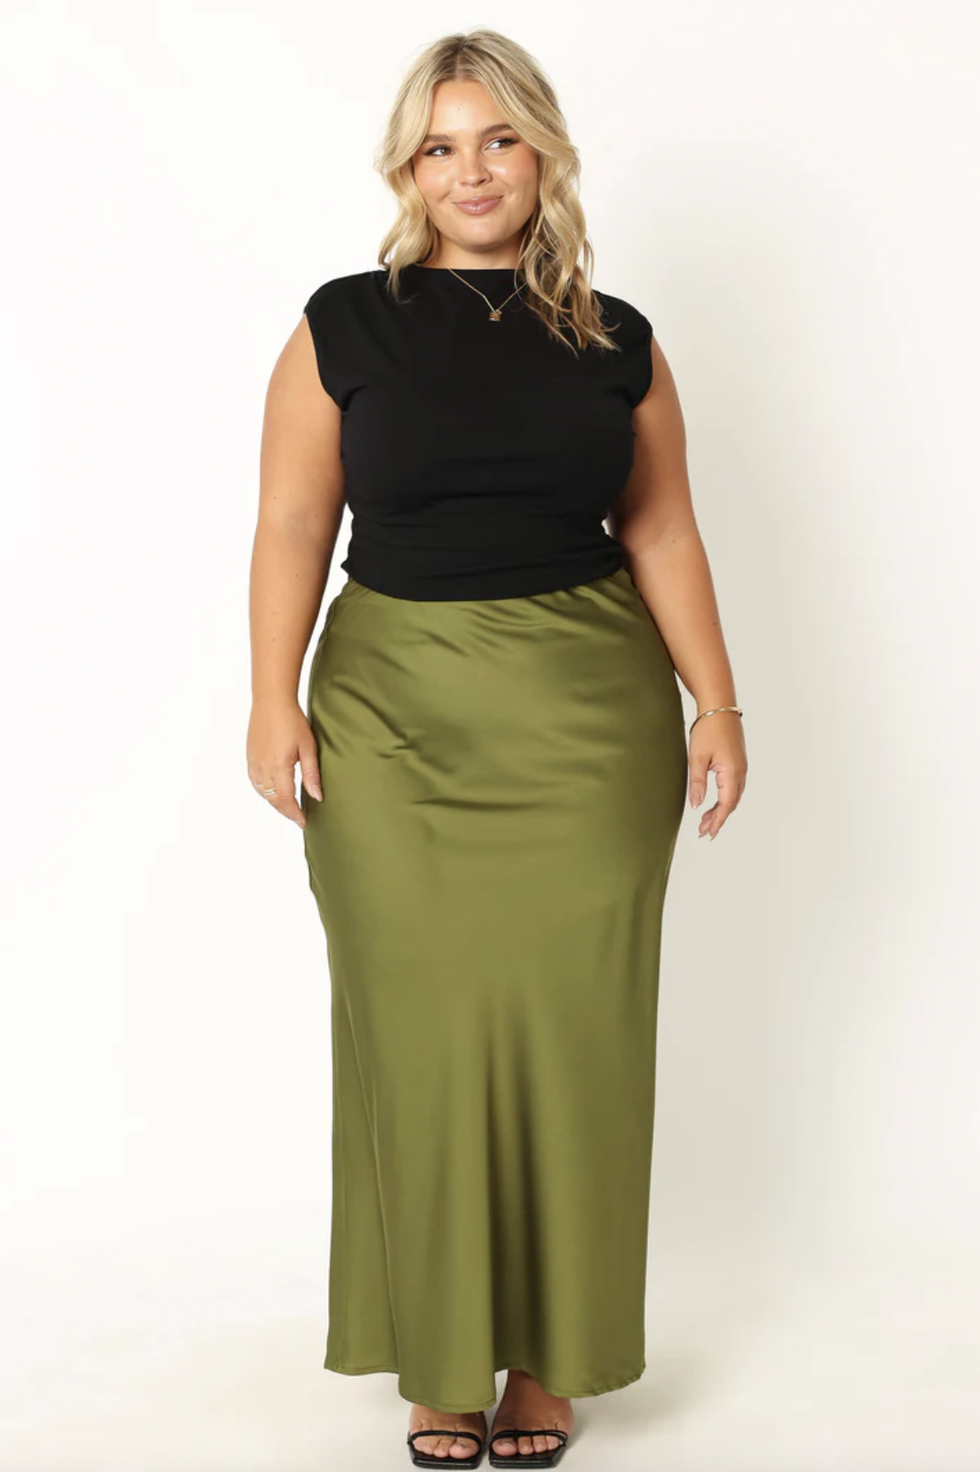 Casual collection of women's clothes. Plus size European blonde